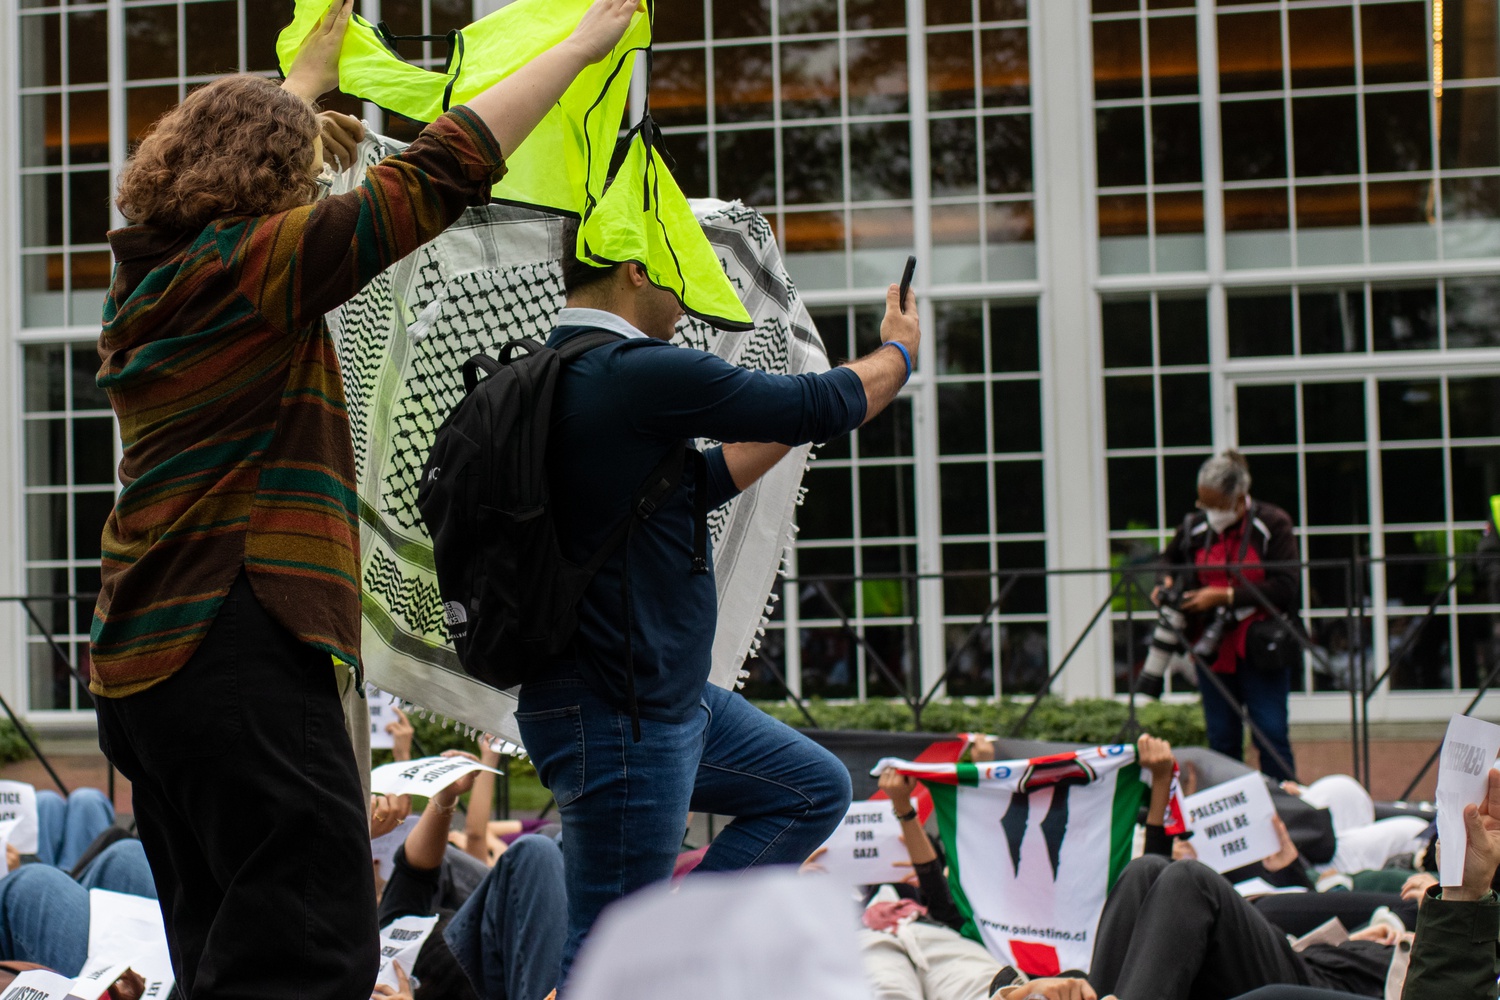 Protesters at an Oct. 18 pro-Palestine "die-in" demonstration attempted to block the camera of a Harvard Business School student who was filming protesters' faces.